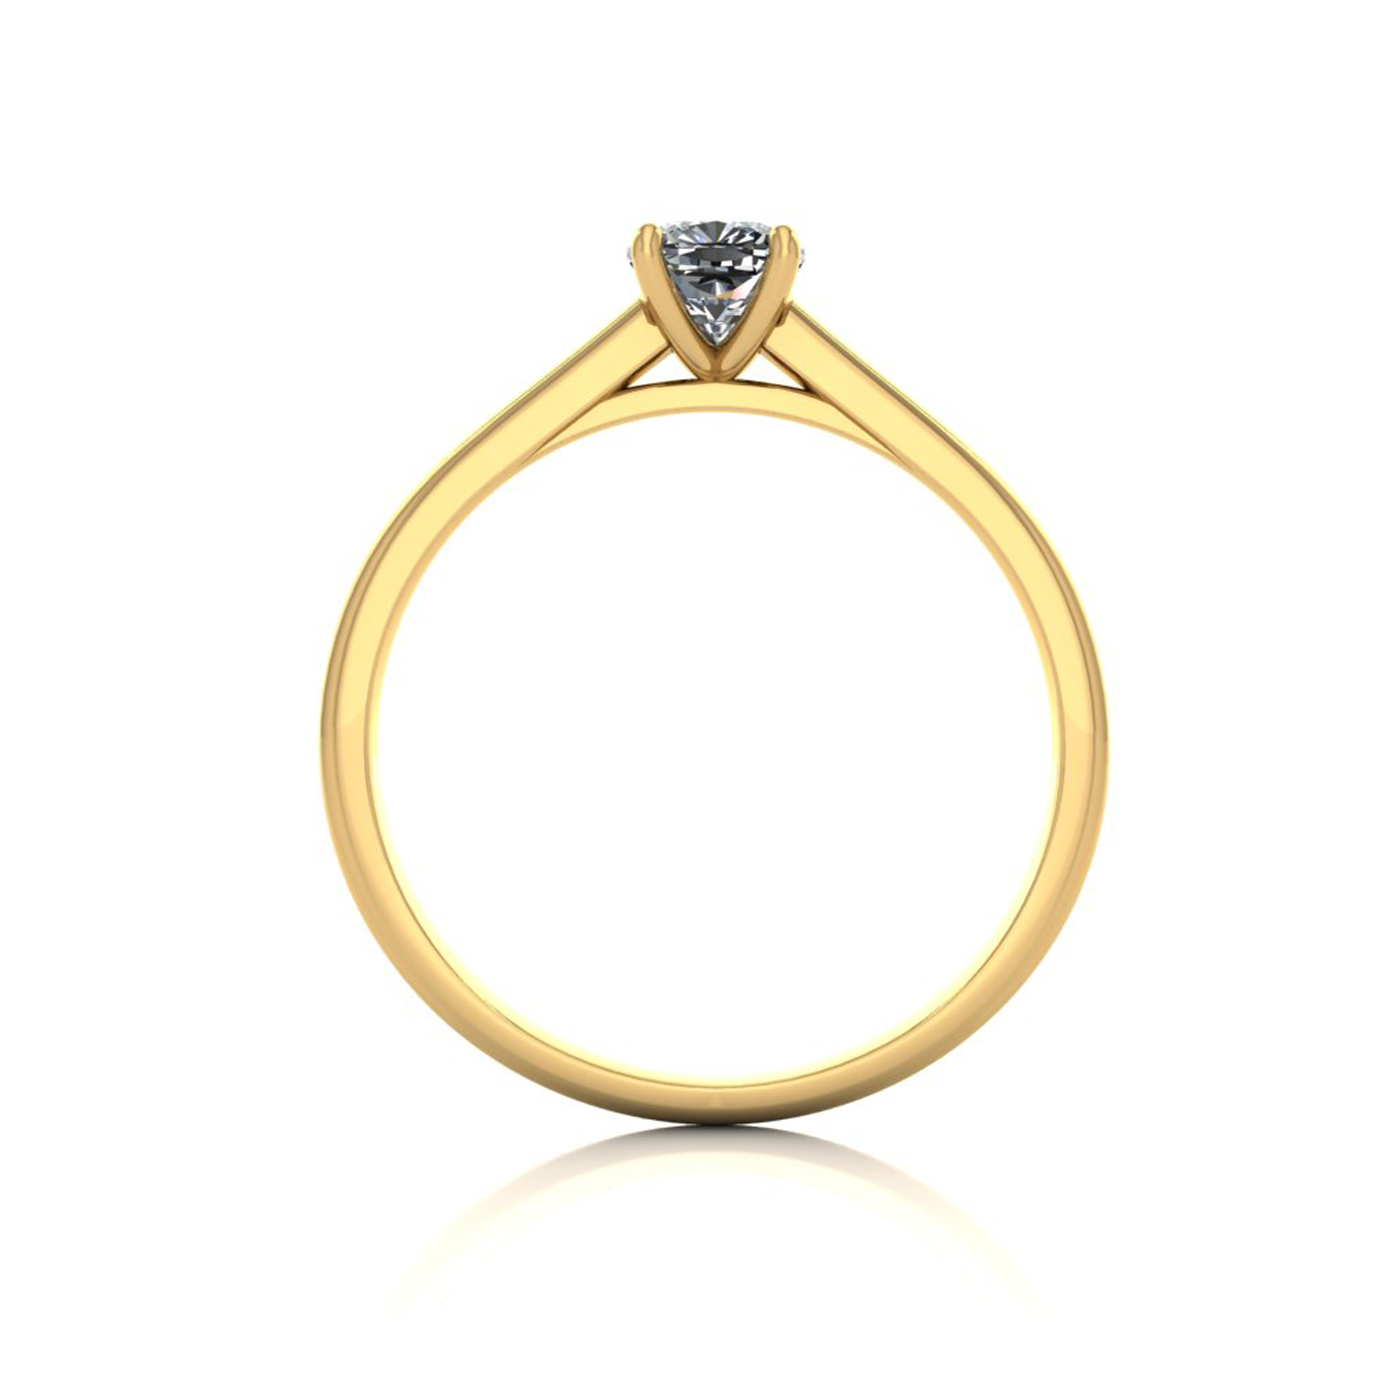 18k yellow gold 0,50 ct 4 prongs solitaire cushion cut diamond engagement ring with whisper thin band